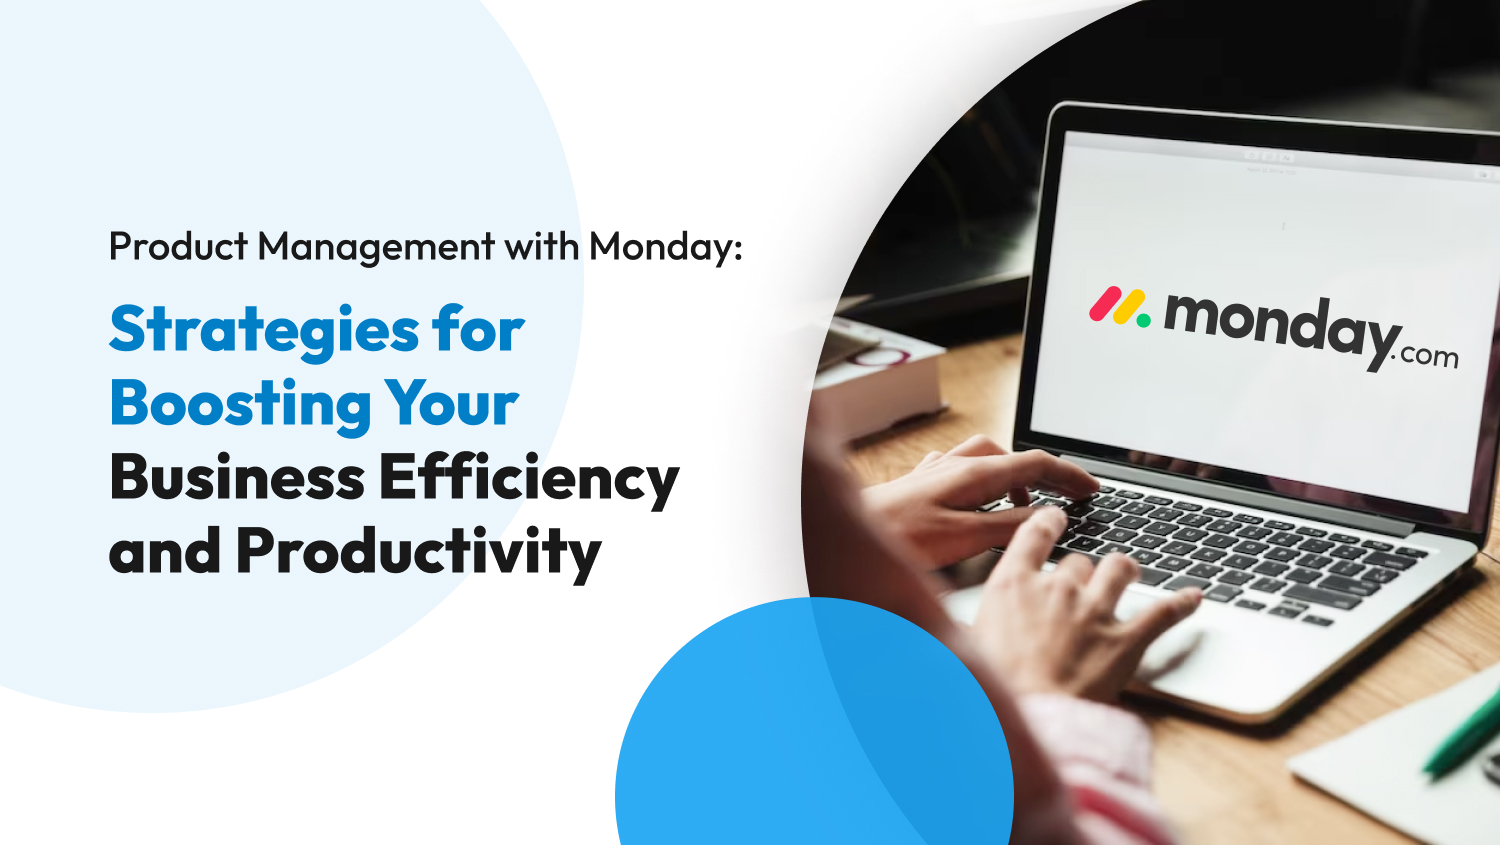 Product Management with Monday: Strategies for Boosting Your Business Efficiency and Productivity